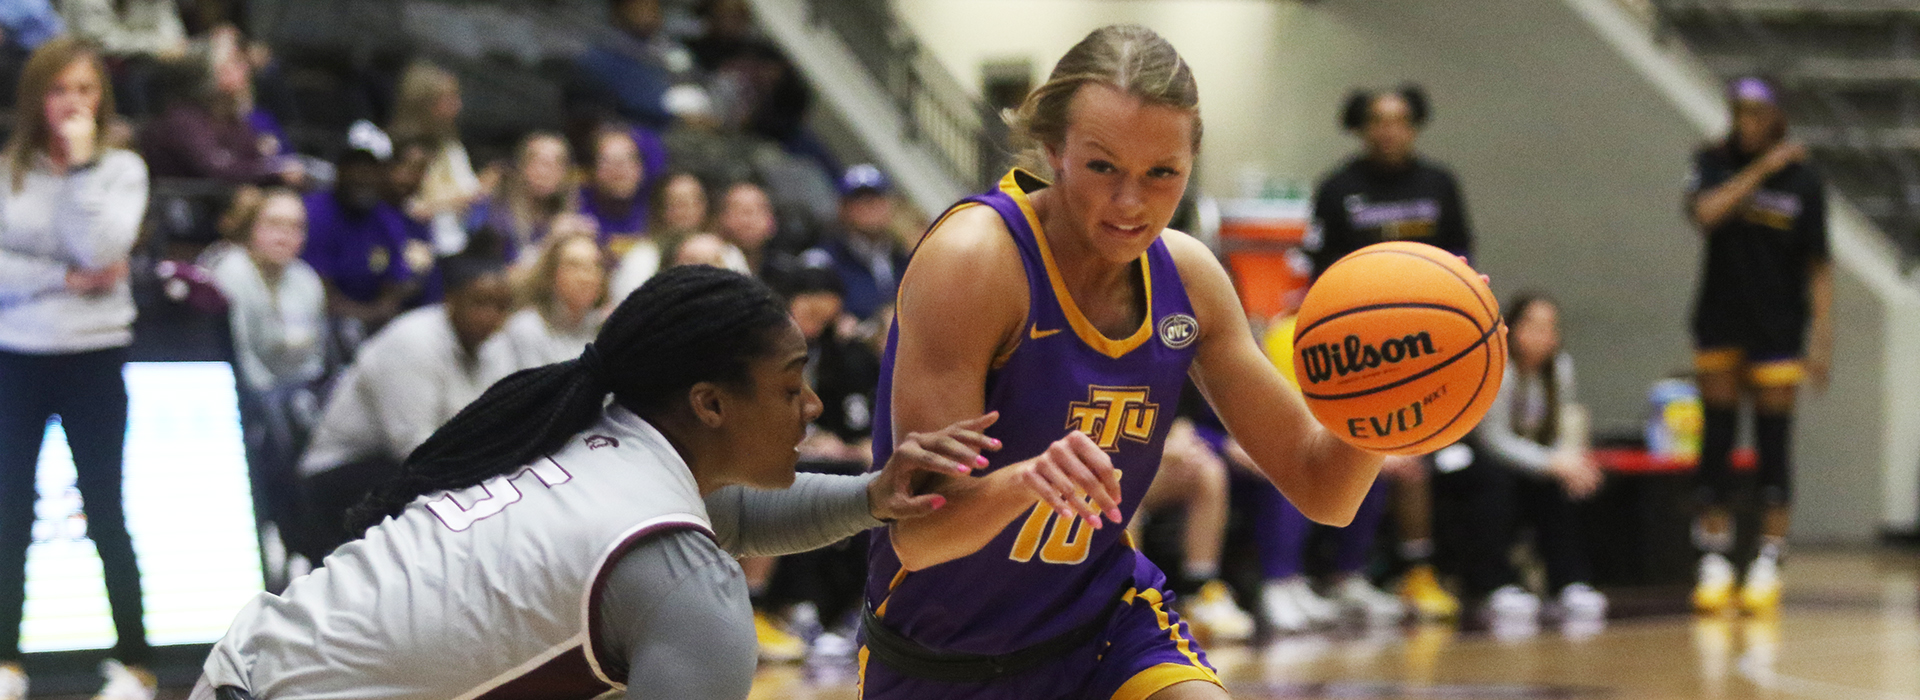 Golden Eagle women fall in overtime to Little Rock, take No. 6 seed in OVC tourney